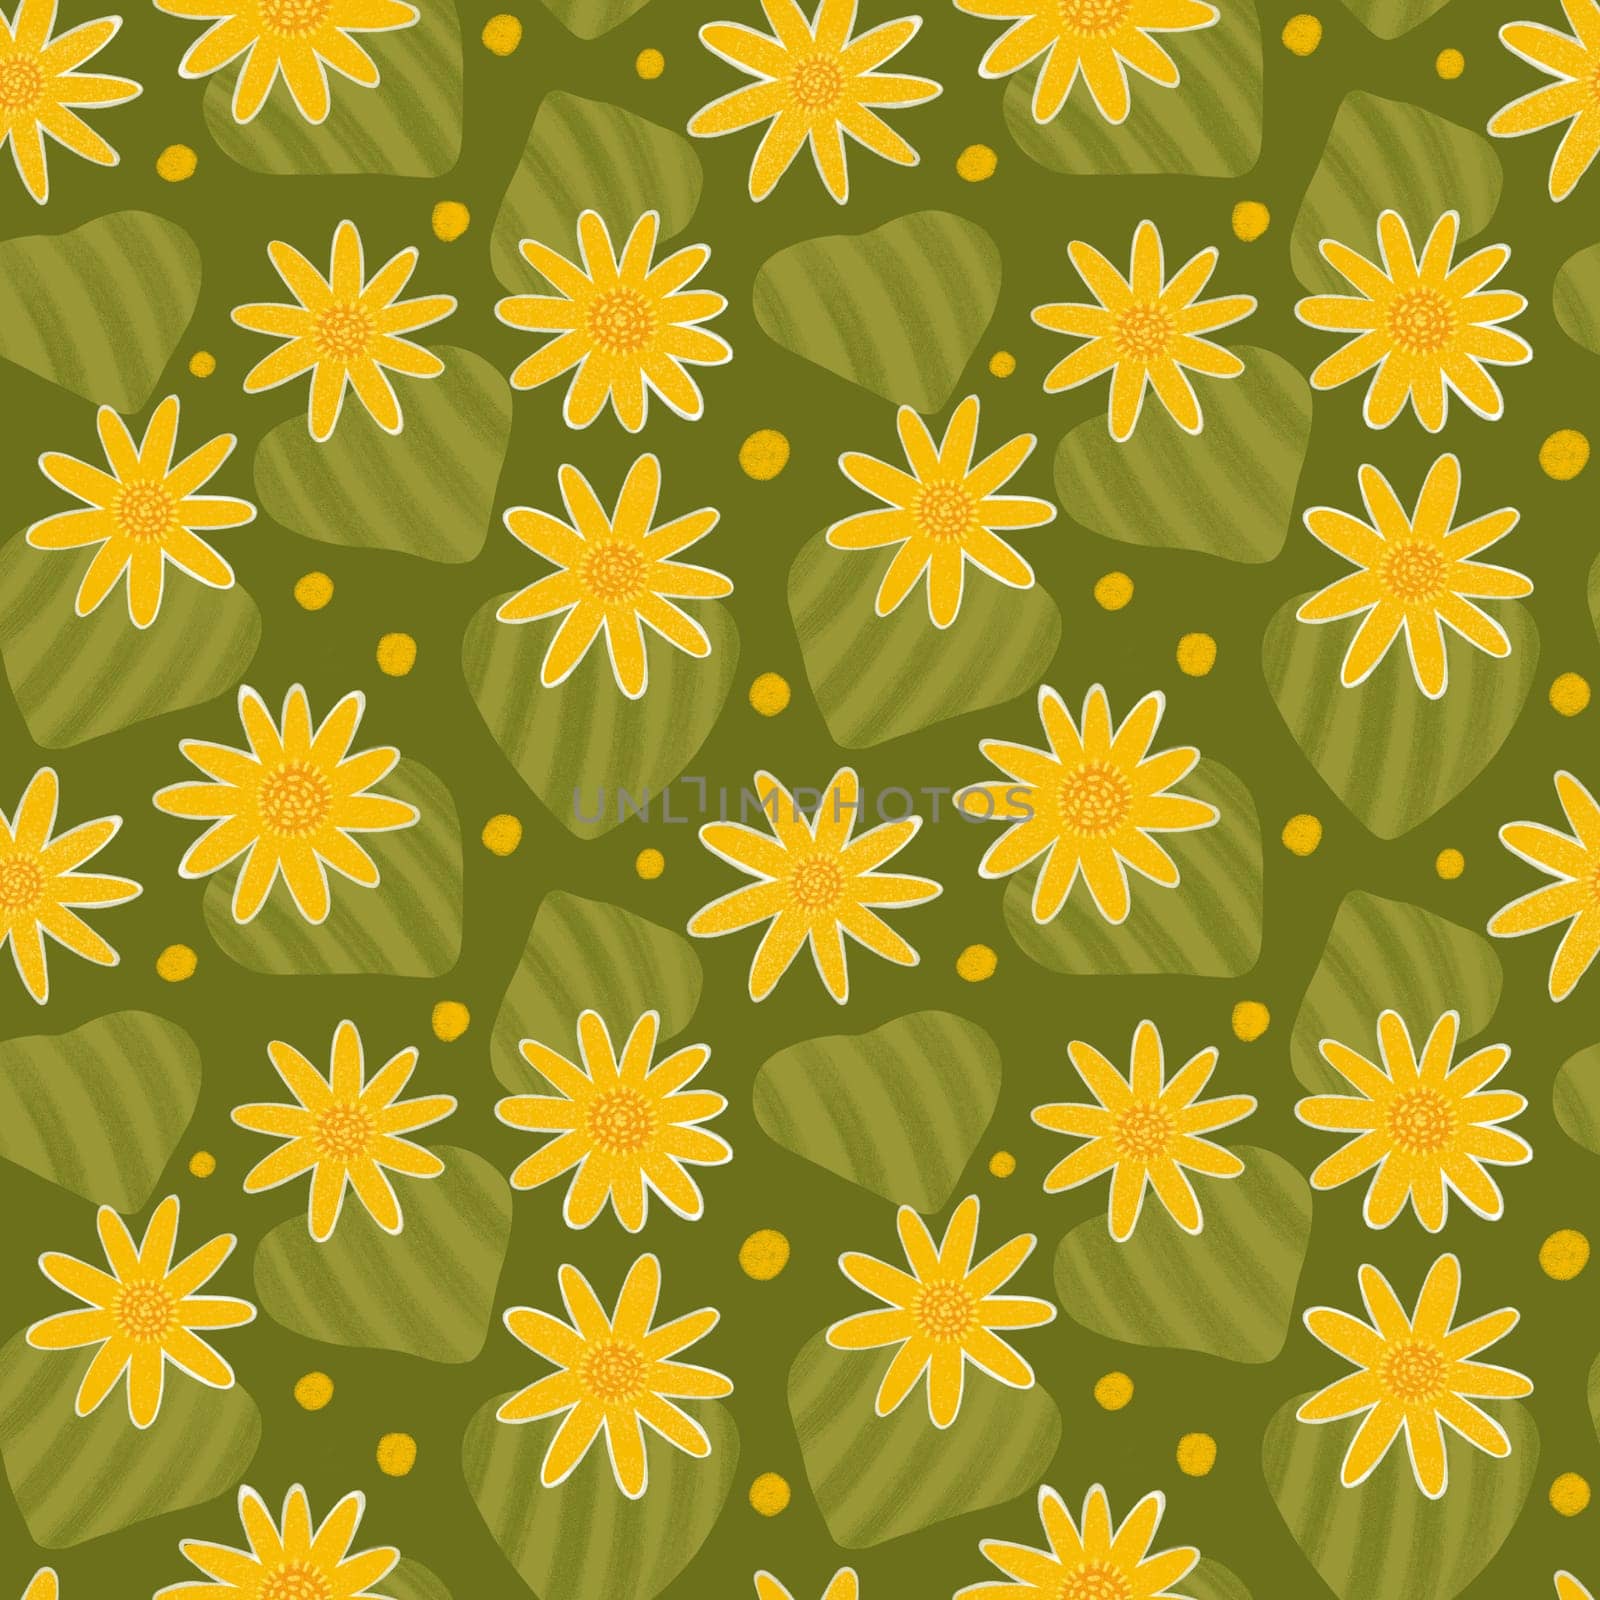 Floral seamless pattern. Yellow flowers with leaves on green background. Cute hand drawn water lilies with brush texture. Summer floral repeated design for textile, fabrics, wallpaper. by Olya_Haifisch